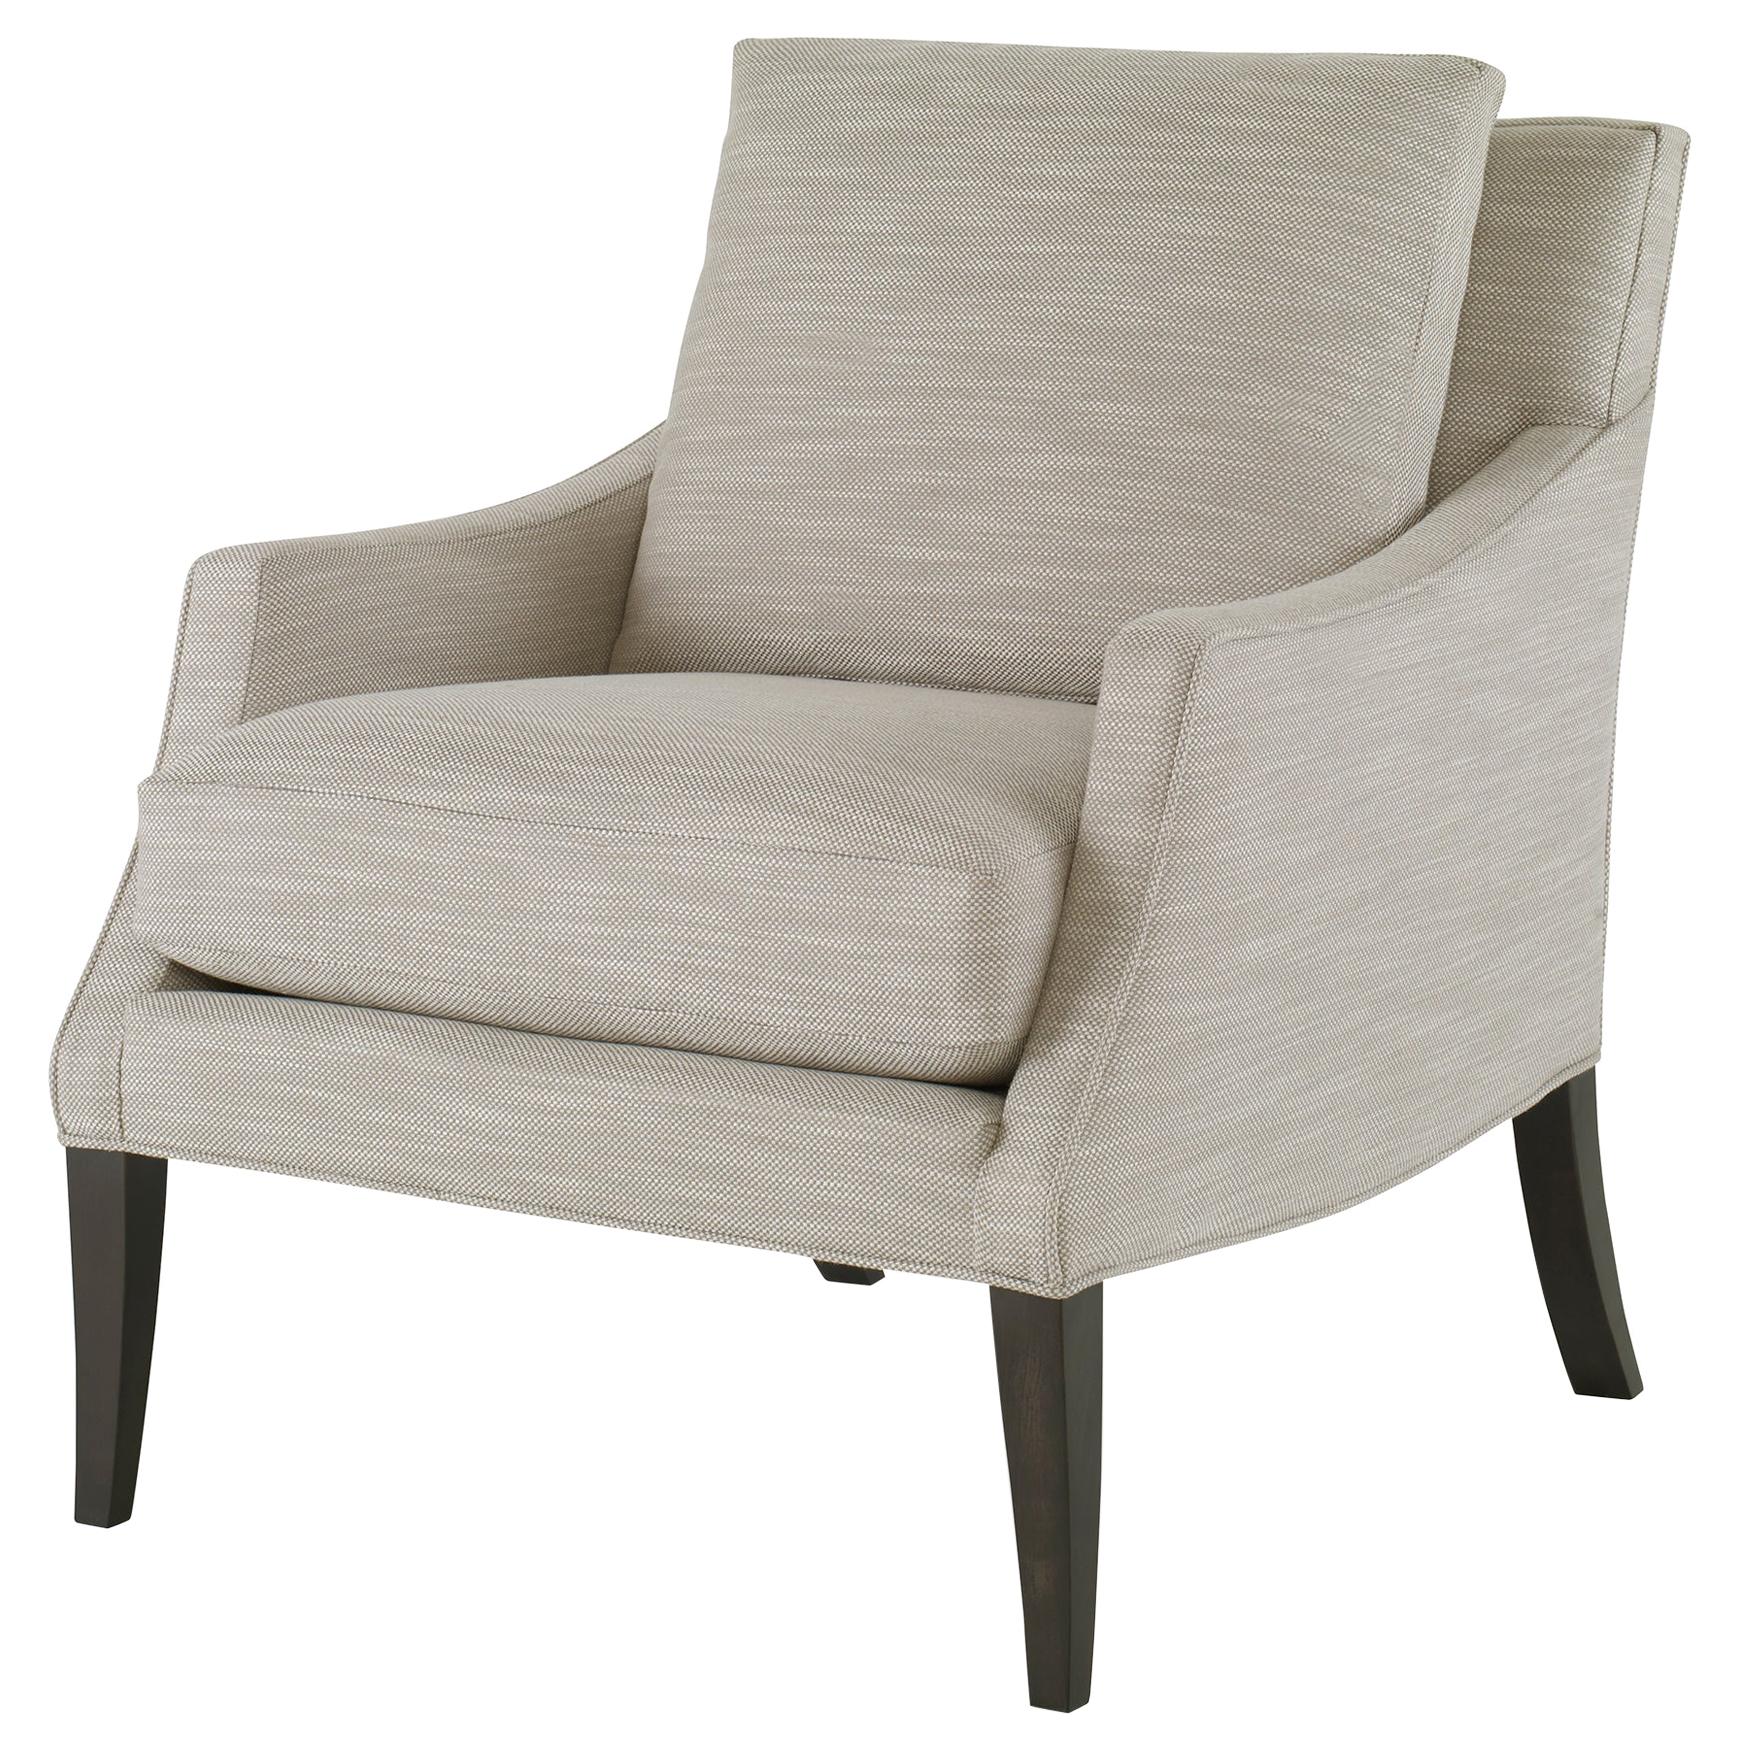 Adair Chair In Gray And White By Curatedkravet For Sale At 1stdibs Baker barbara barry chair and table. 1stdibs